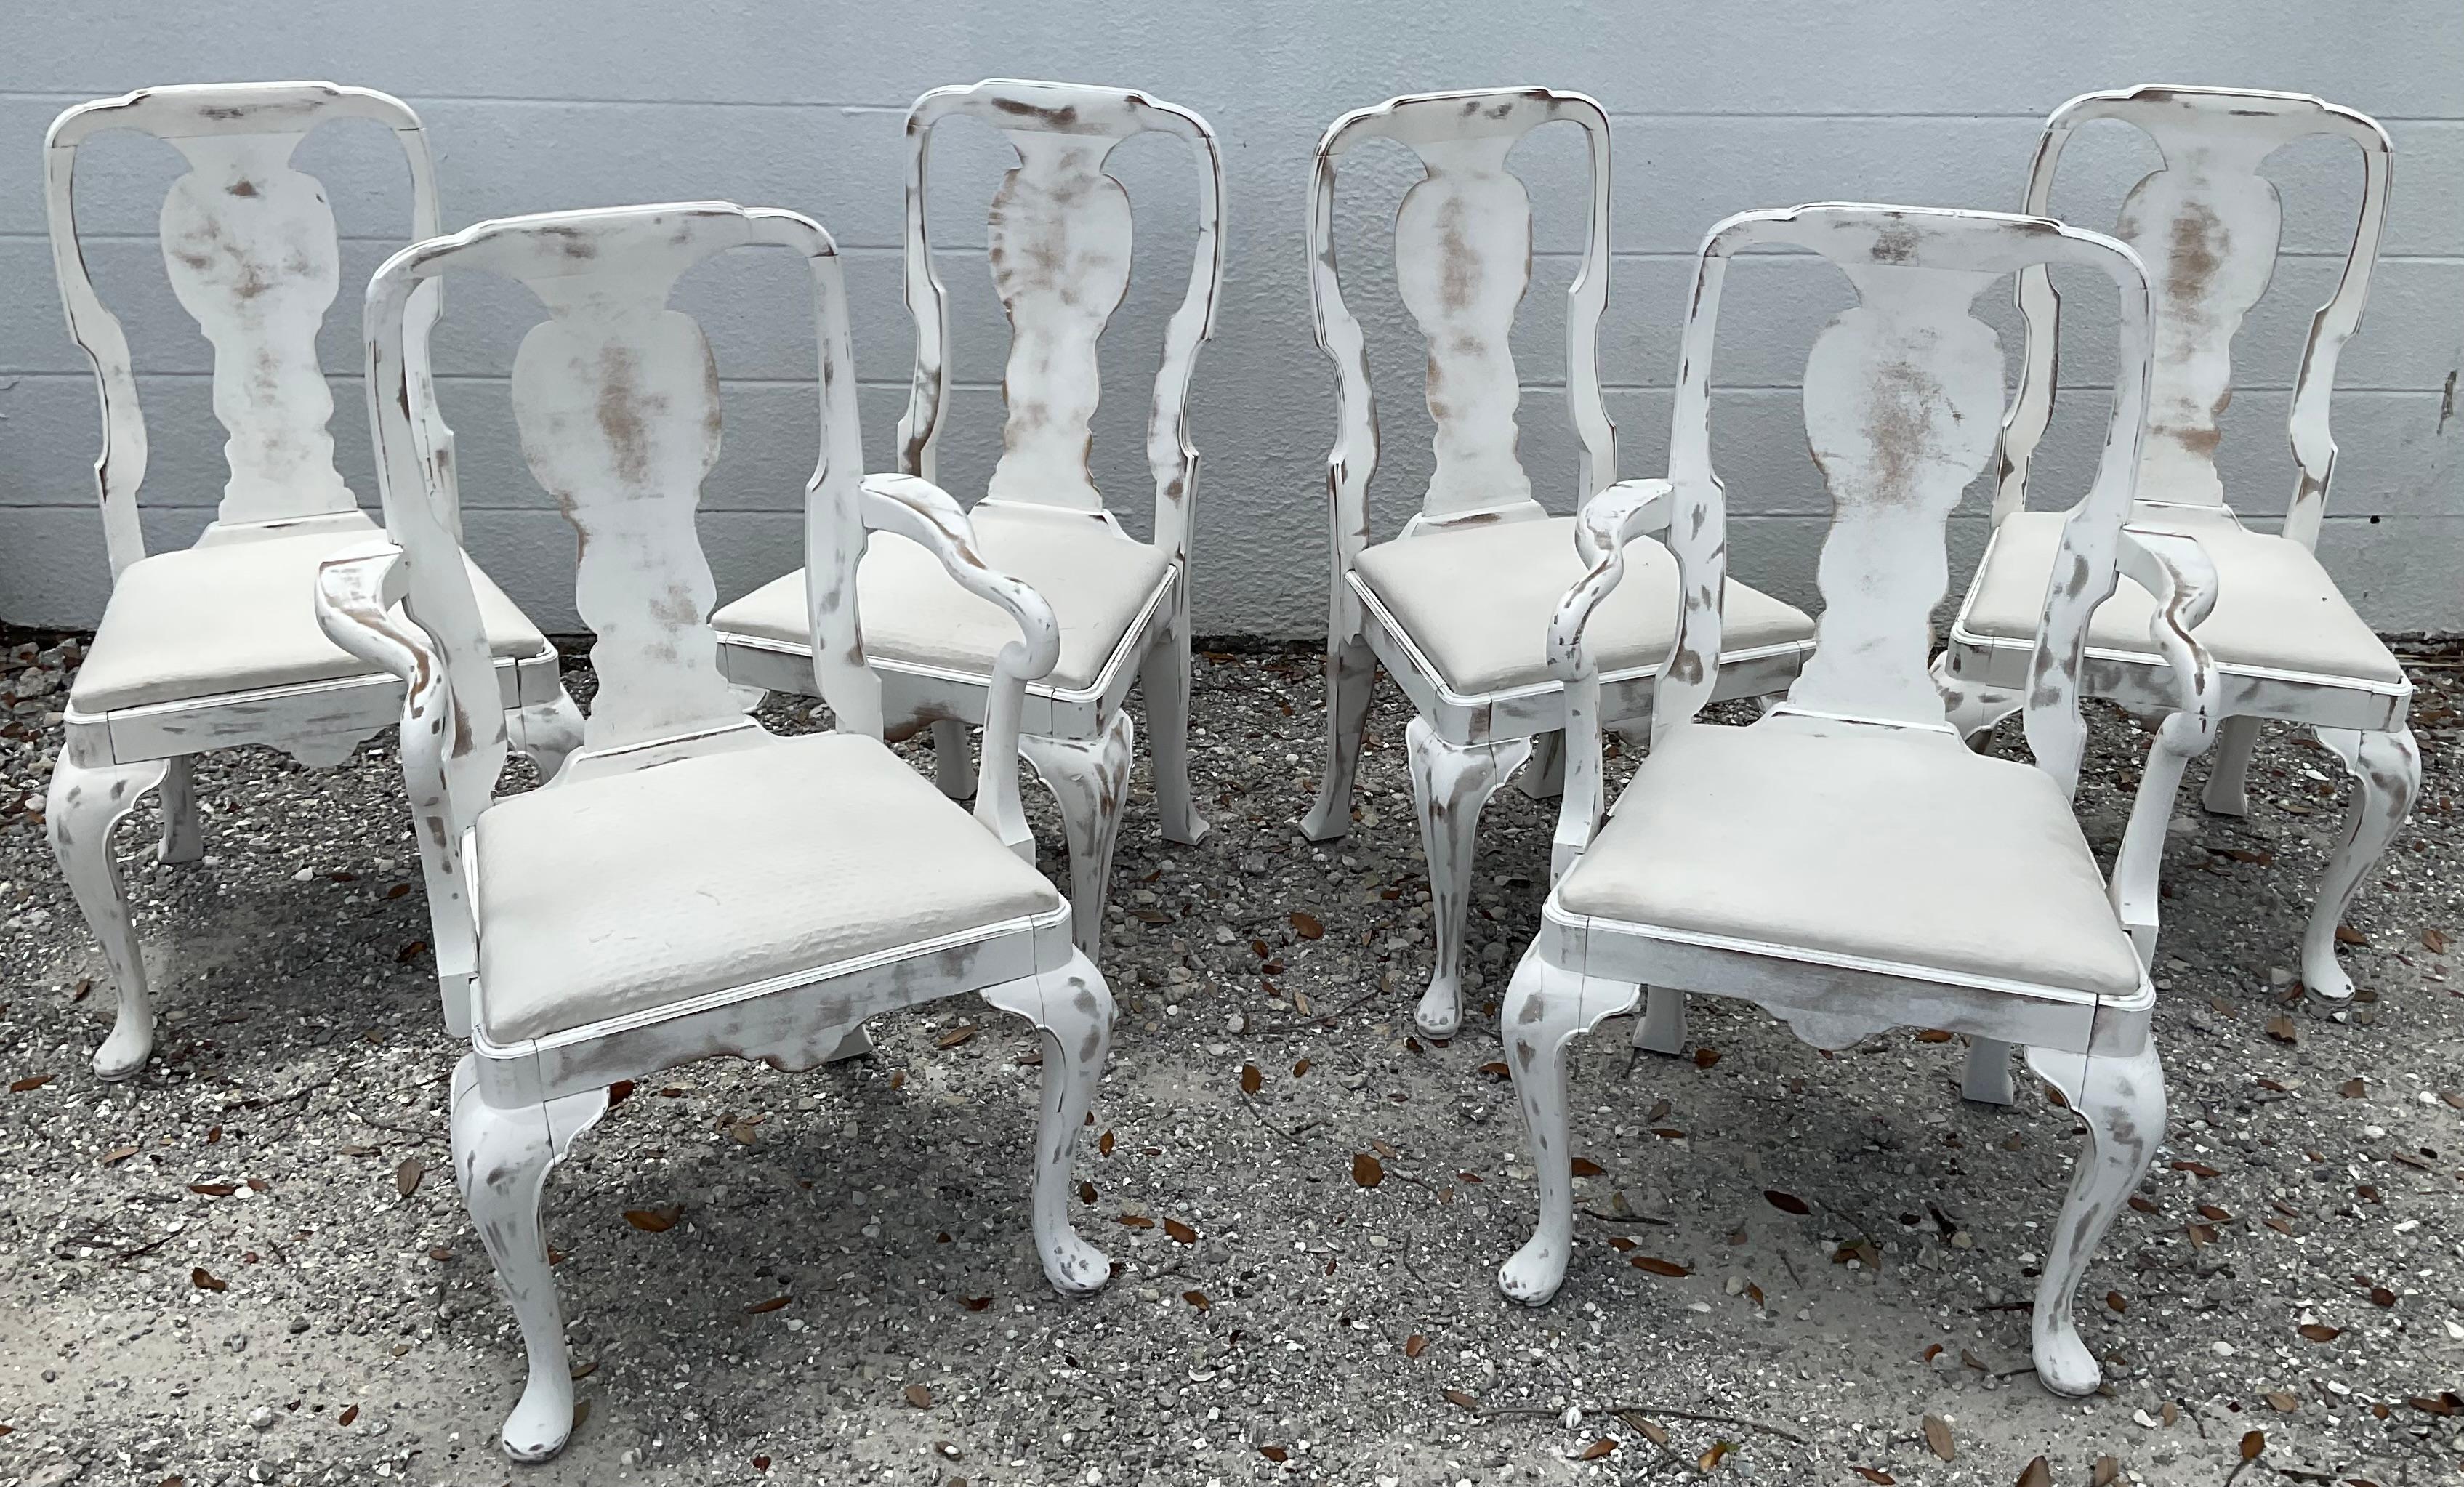 Set of six (6) elegant Swedish style Queen Anne Dining Chairs. Classic Queen Anne back rest, with rounded shoulders and cabriole legs. Set consists of two armchairs and four side chairs all painted in a wonderful white distressed finish with